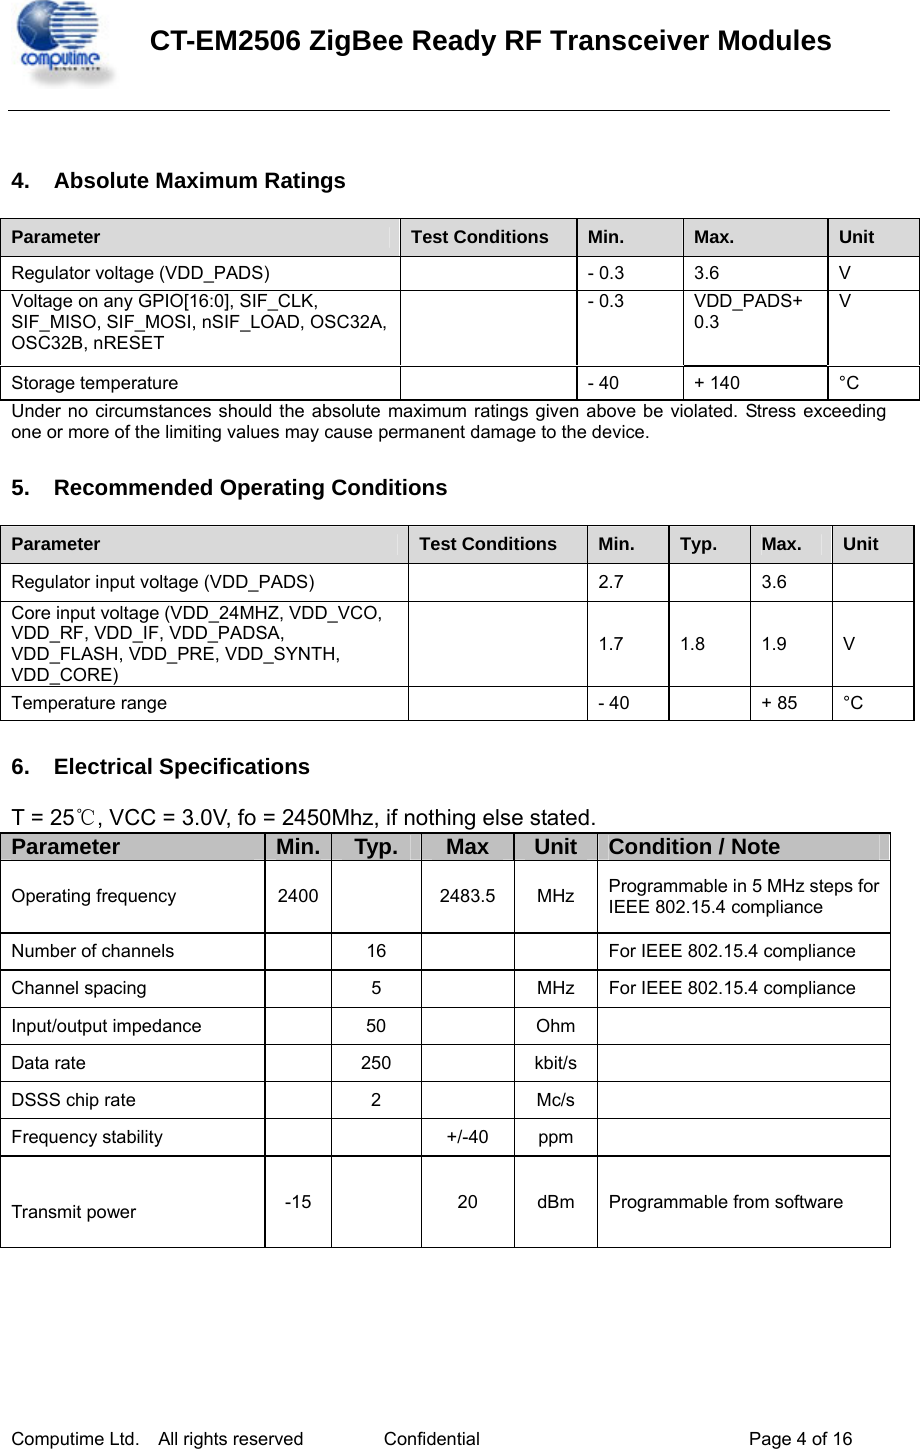  CT-EM2506 ZigBee Ready RF Transceiver Modules  Computime Ltd.    All rights reserved  Confidential  Page 4 of 16   4. Absolute Maximum Ratings Parameter   Test Conditions   Min.   Max.   Unit   Regulator voltage (VDD_PADS)     - 0.3   3.6   V  Voltage on any GPIO[16:0], SIF_CLK, SIF_MISO, SIF_MOSI, nSIF_LOAD, OSC32A, OSC32B, nRESET    - 0.3  VDD_PADS+ 0.3  V  Storage temperature     - 40   + 140   °C  Under no circumstances should the absolute maximum ratings given above be violated. Stress exceeding one or more of the limiting values may cause permanent damage to the device. 5. Recommended Operating Conditions Parameter   Test Conditions   Min.   Typ.   Max.   Unit   Regulator input voltage (VDD_PADS)      2.7    3.6   Core input voltage (VDD_24MHZ, VDD_VCO, VDD_RF, VDD_IF, VDD_PADSA, VDD_FLASH, VDD_PRE, VDD_SYNTH, VDD_CORE)    1.7   1.8   1.9   V  Temperature range     - 40     + 85   °C  6. Electrical Specifications T = 25℃, VCC = 3.0V, fo = 2450Mhz, if nothing else stated. Parameter   Min.  Typ.  Max  Unit  Condition / Note   Operating frequency    2400    2483.5 MHz  Programmable in 5 MHz steps for IEEE 802.15.4 compliance   Number of channels      16      For IEEE 802.15.4 compliance   Channel spacing      5    MHz  For IEEE 802.15.4 compliance   Input/output impedance      50    Ohm   Data rate      250    kbit/s   DSSS chip rate      2    Mc/s   Frequency stability        +/-40  ppm    Transmit power    -15   20 dBm Programmable from software 